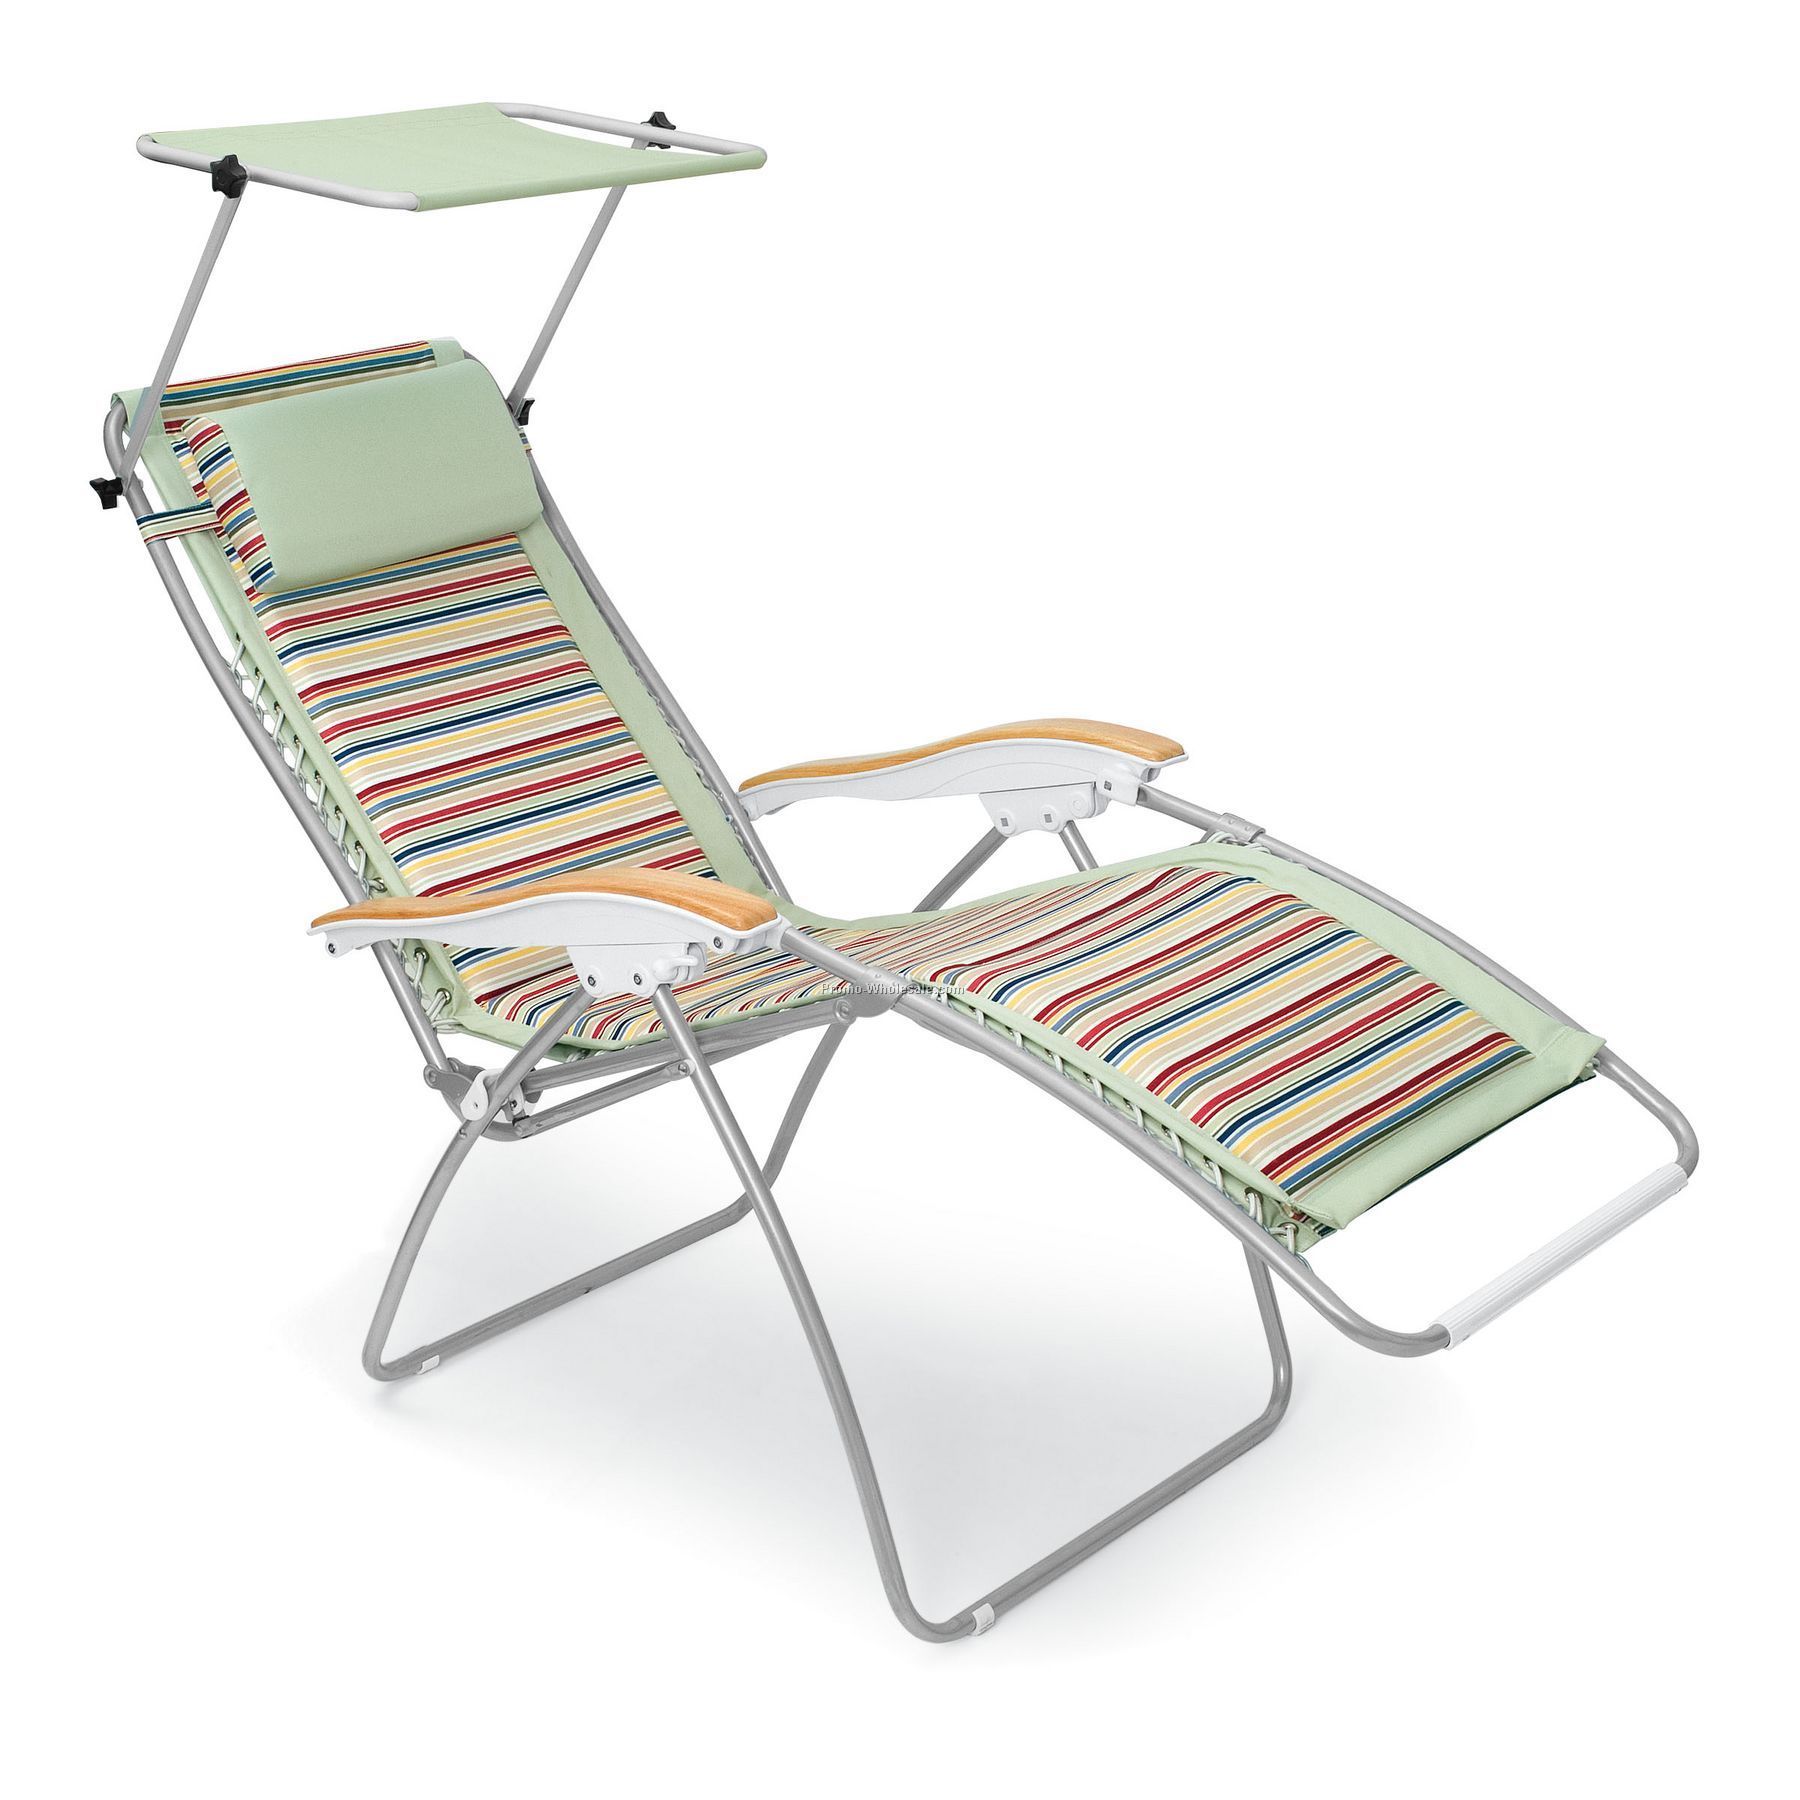 Serenity - Riviera Reclining Lounge Chair With Adjustable Sunshade